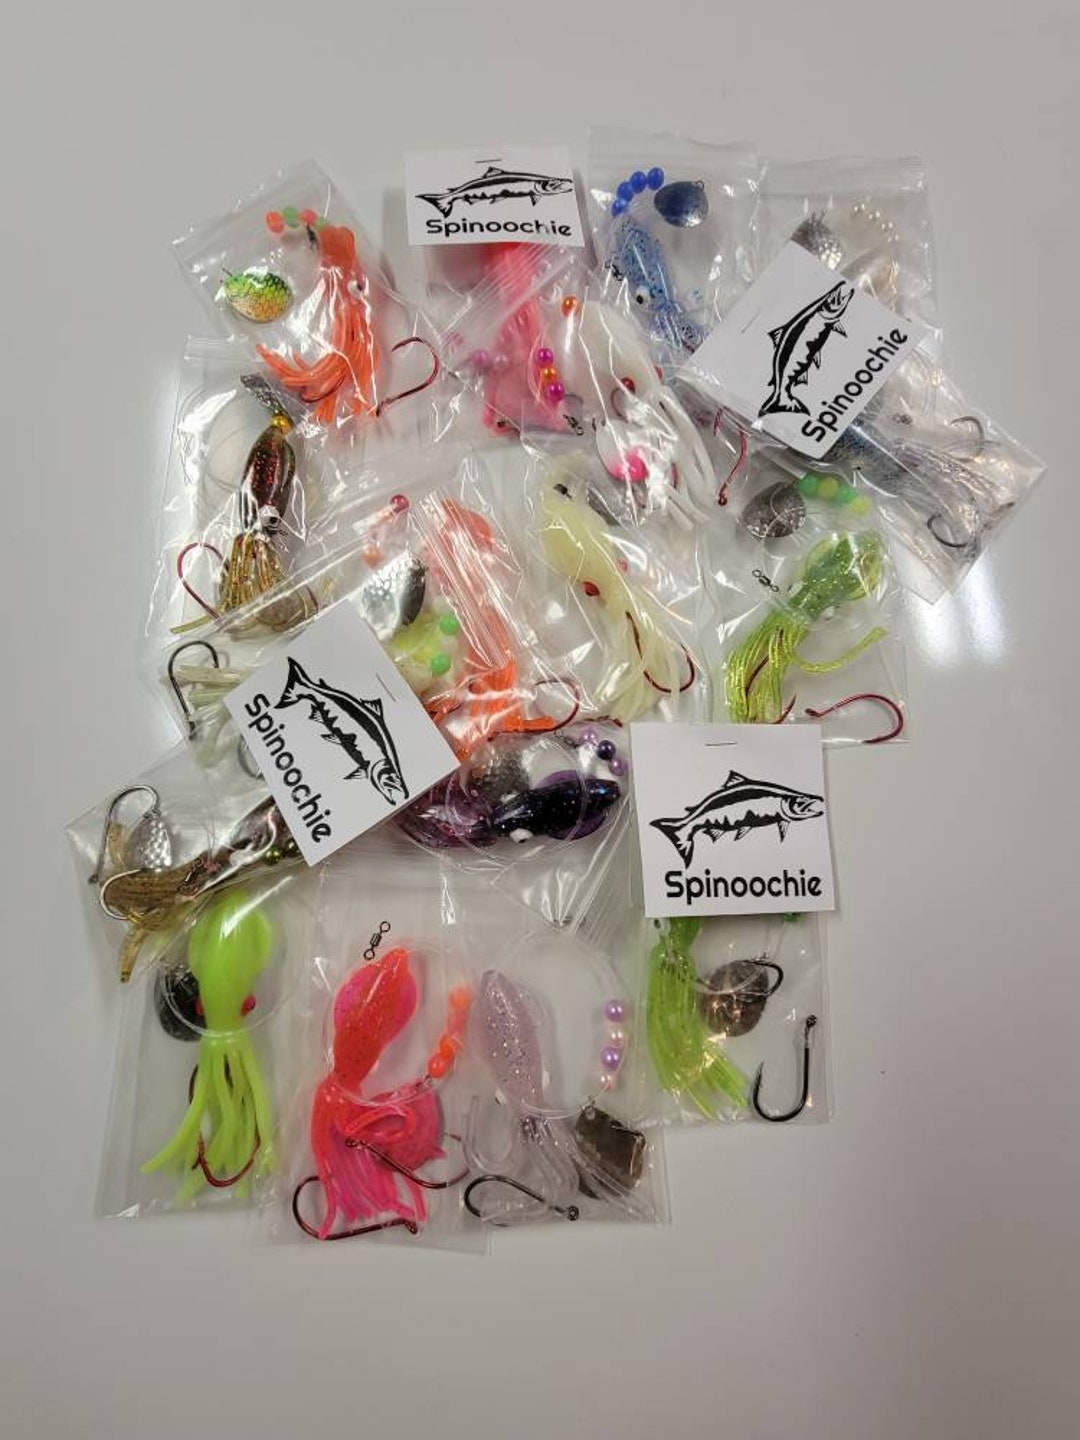 Spinoochie Salmon Fishing Lure, Best Tackle for Pacific Silver Coho,  Chinook King, Pink, Chum, Sockeye. Catch All Salmon Species. 